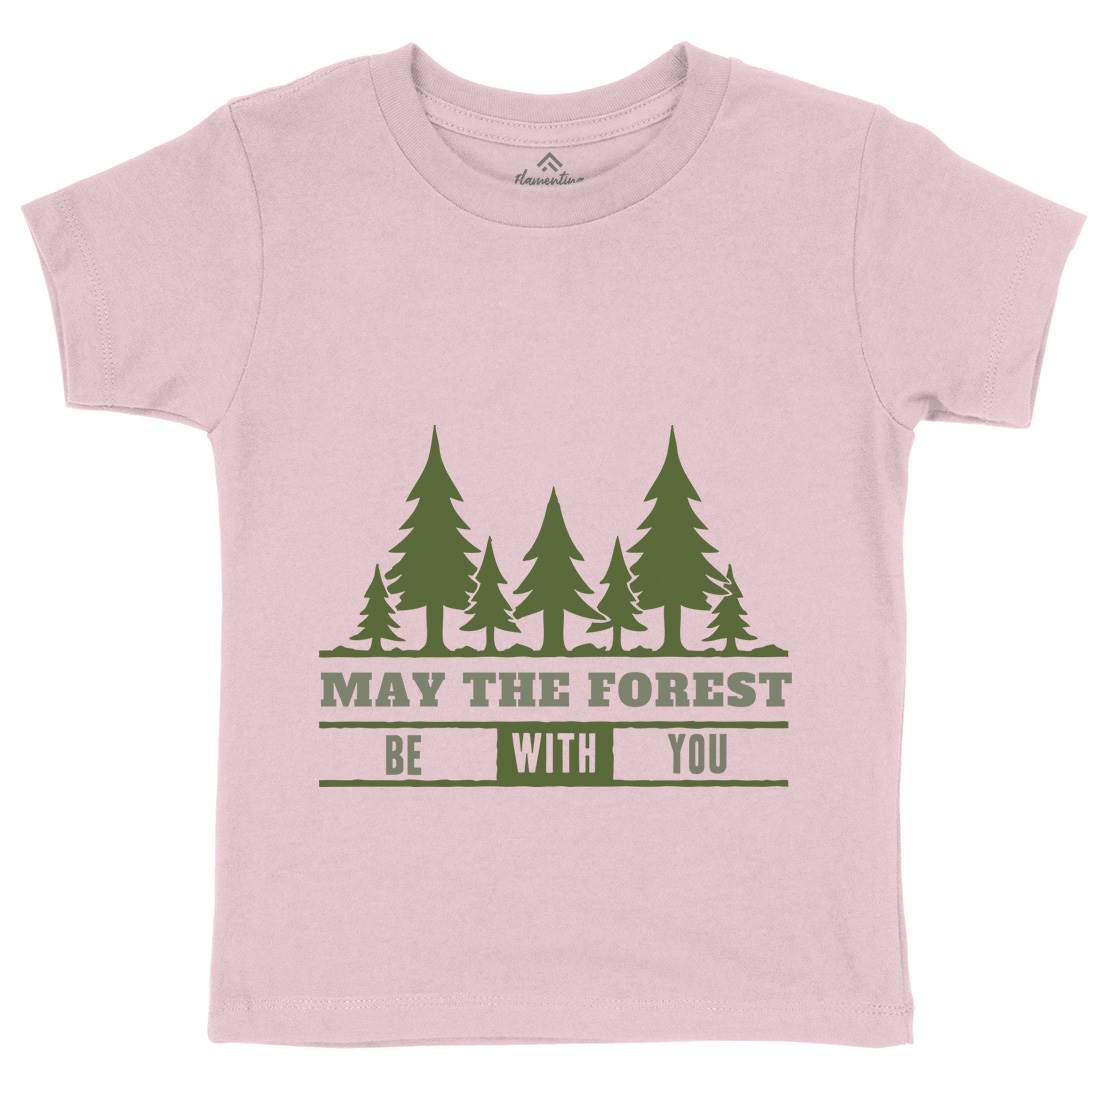 May The Forest Be With You Kids Crew Neck T-Shirt Nature A345